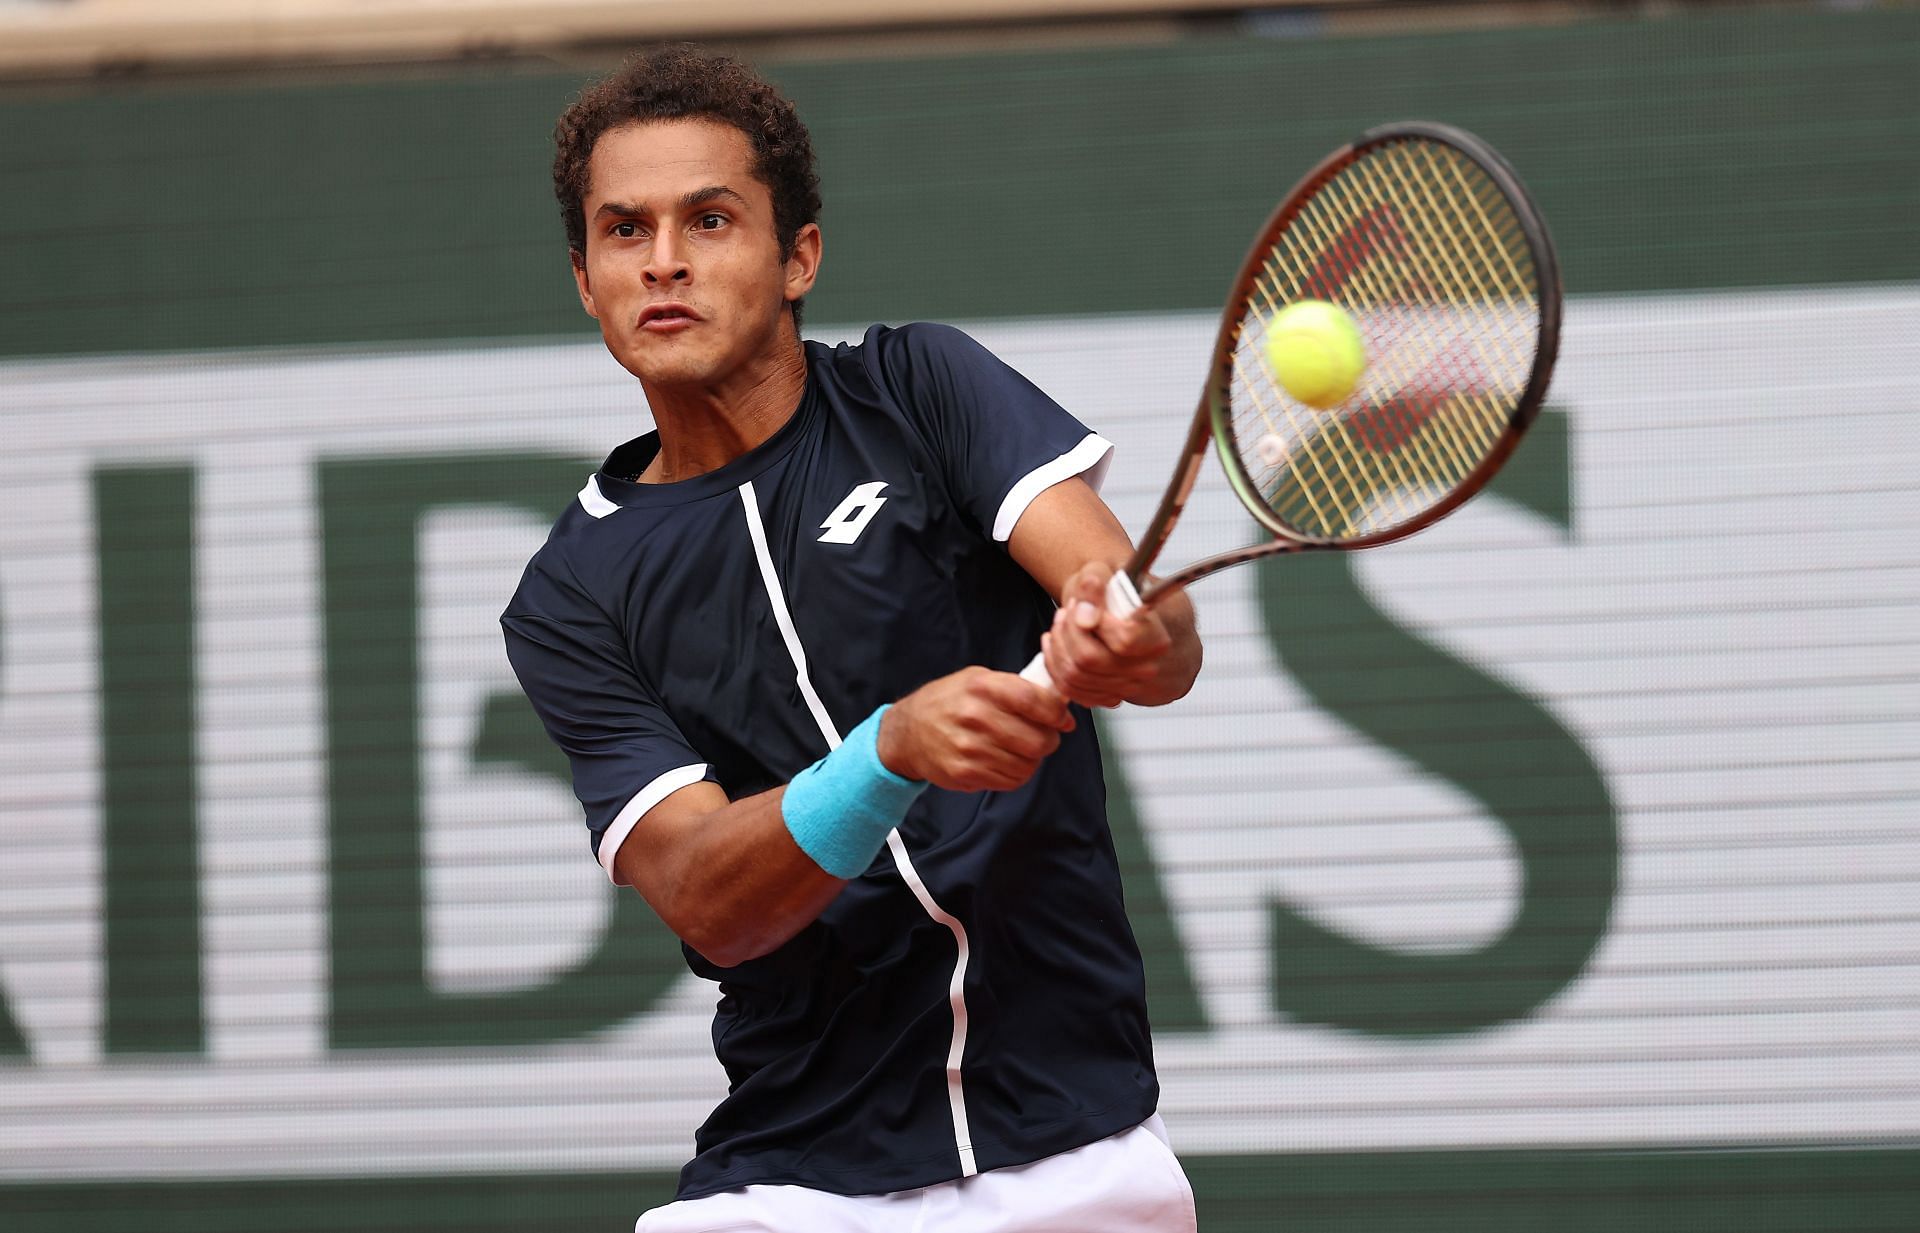 Juan Pablo Varillas in action at the 2022 French Open